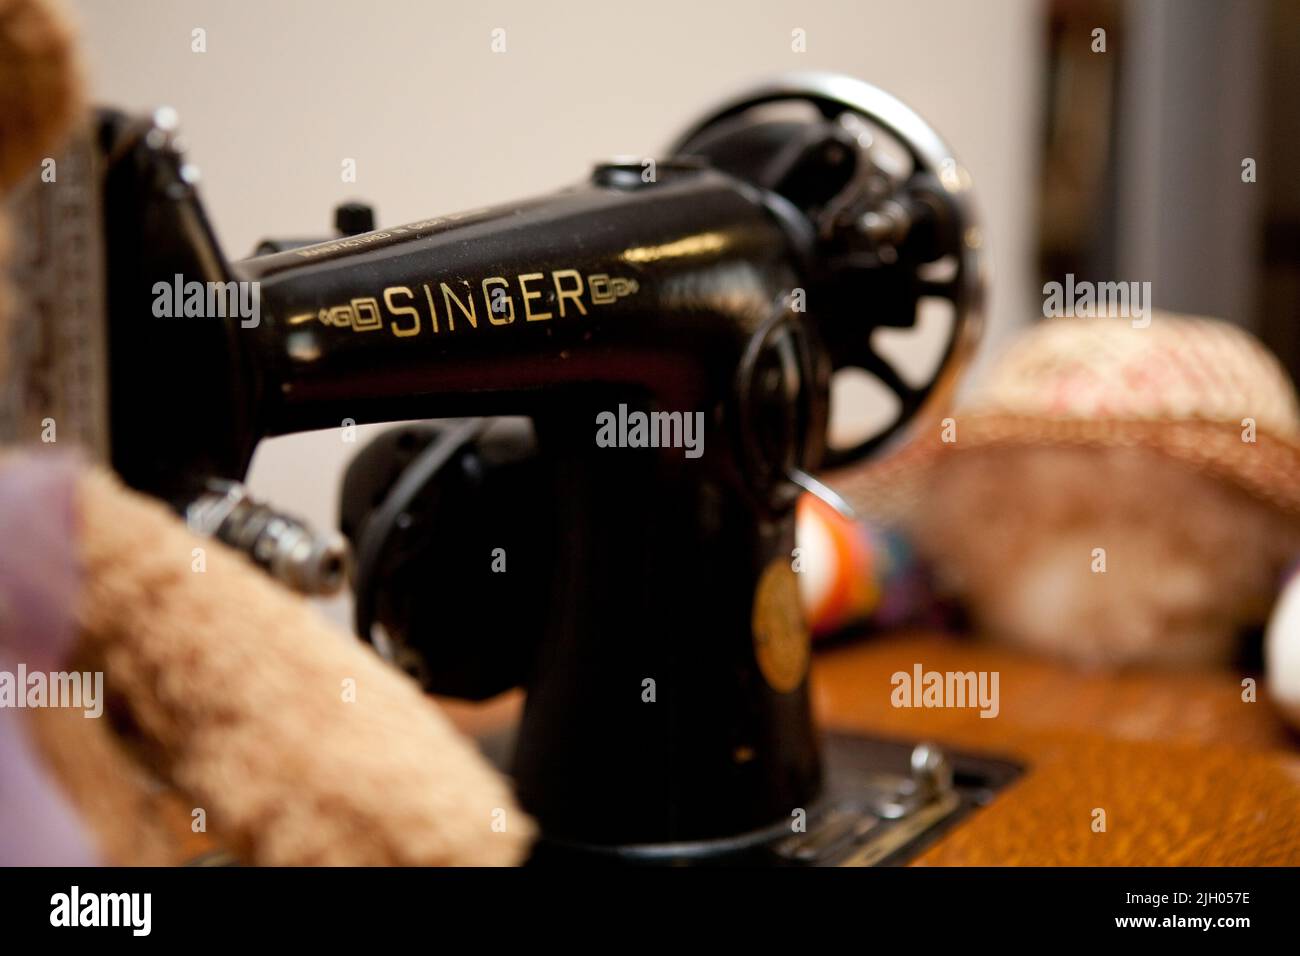 EARLY SINGER SEWING MACHINE Stock Photo